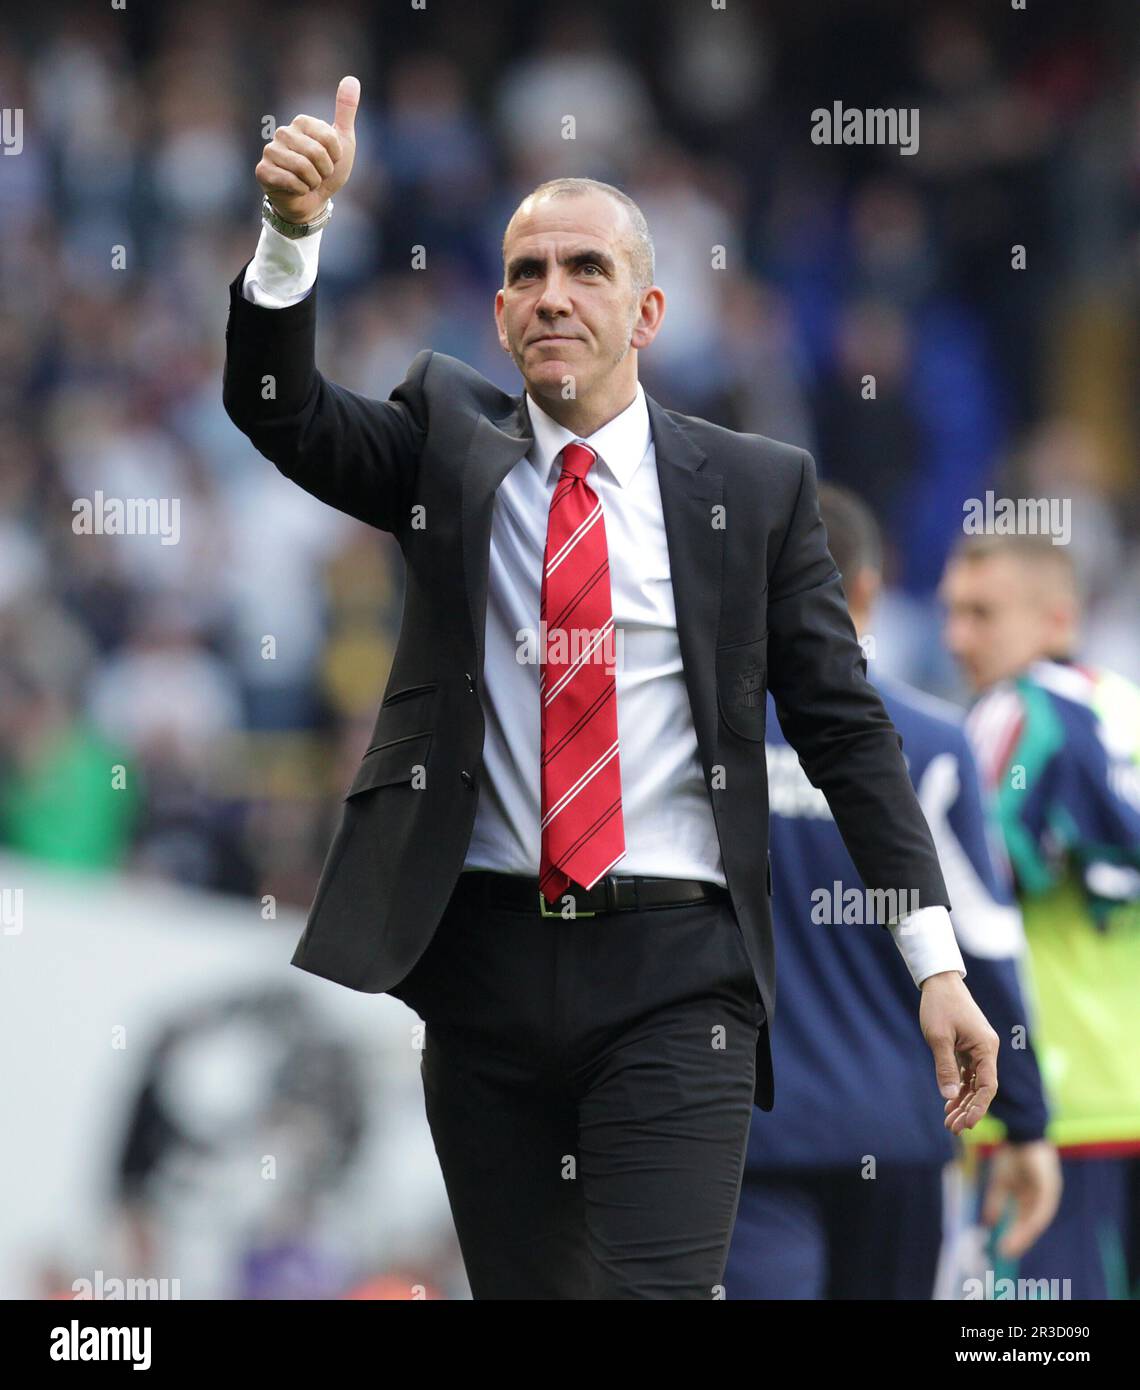 Sunderland's Manager Paolo Di Canio. Spurs beat Sunderland 1:0Tottenham Hotspurs 19/05/13 Tottenham Hotspurs V Sunderland  19/05/13 The Premier League Stock Photo